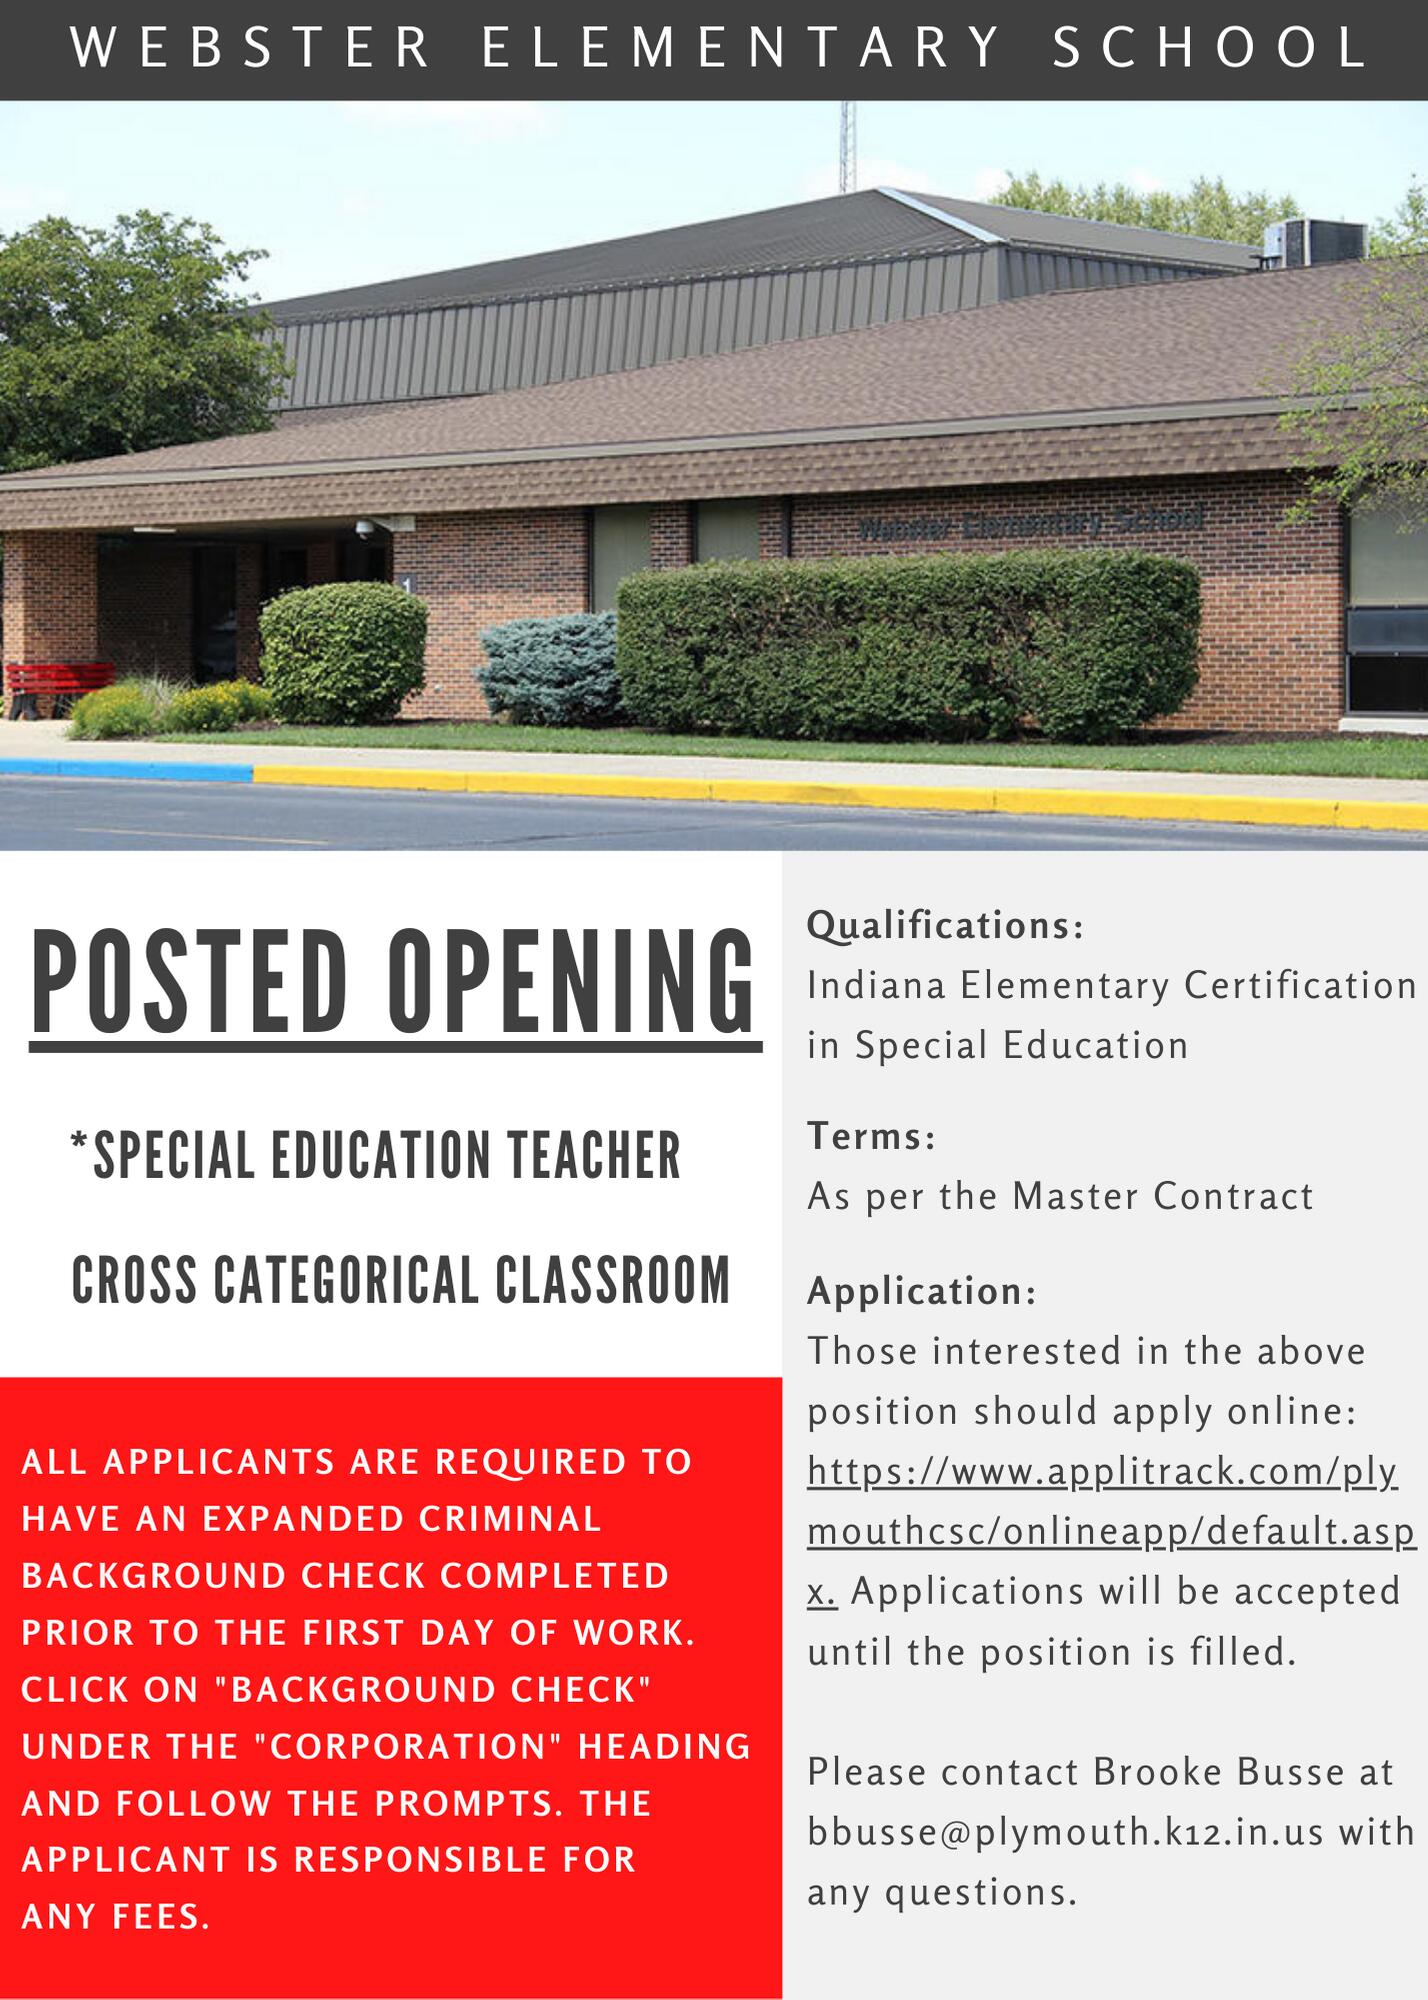 Webster Elementary Special Education Teacher Posting